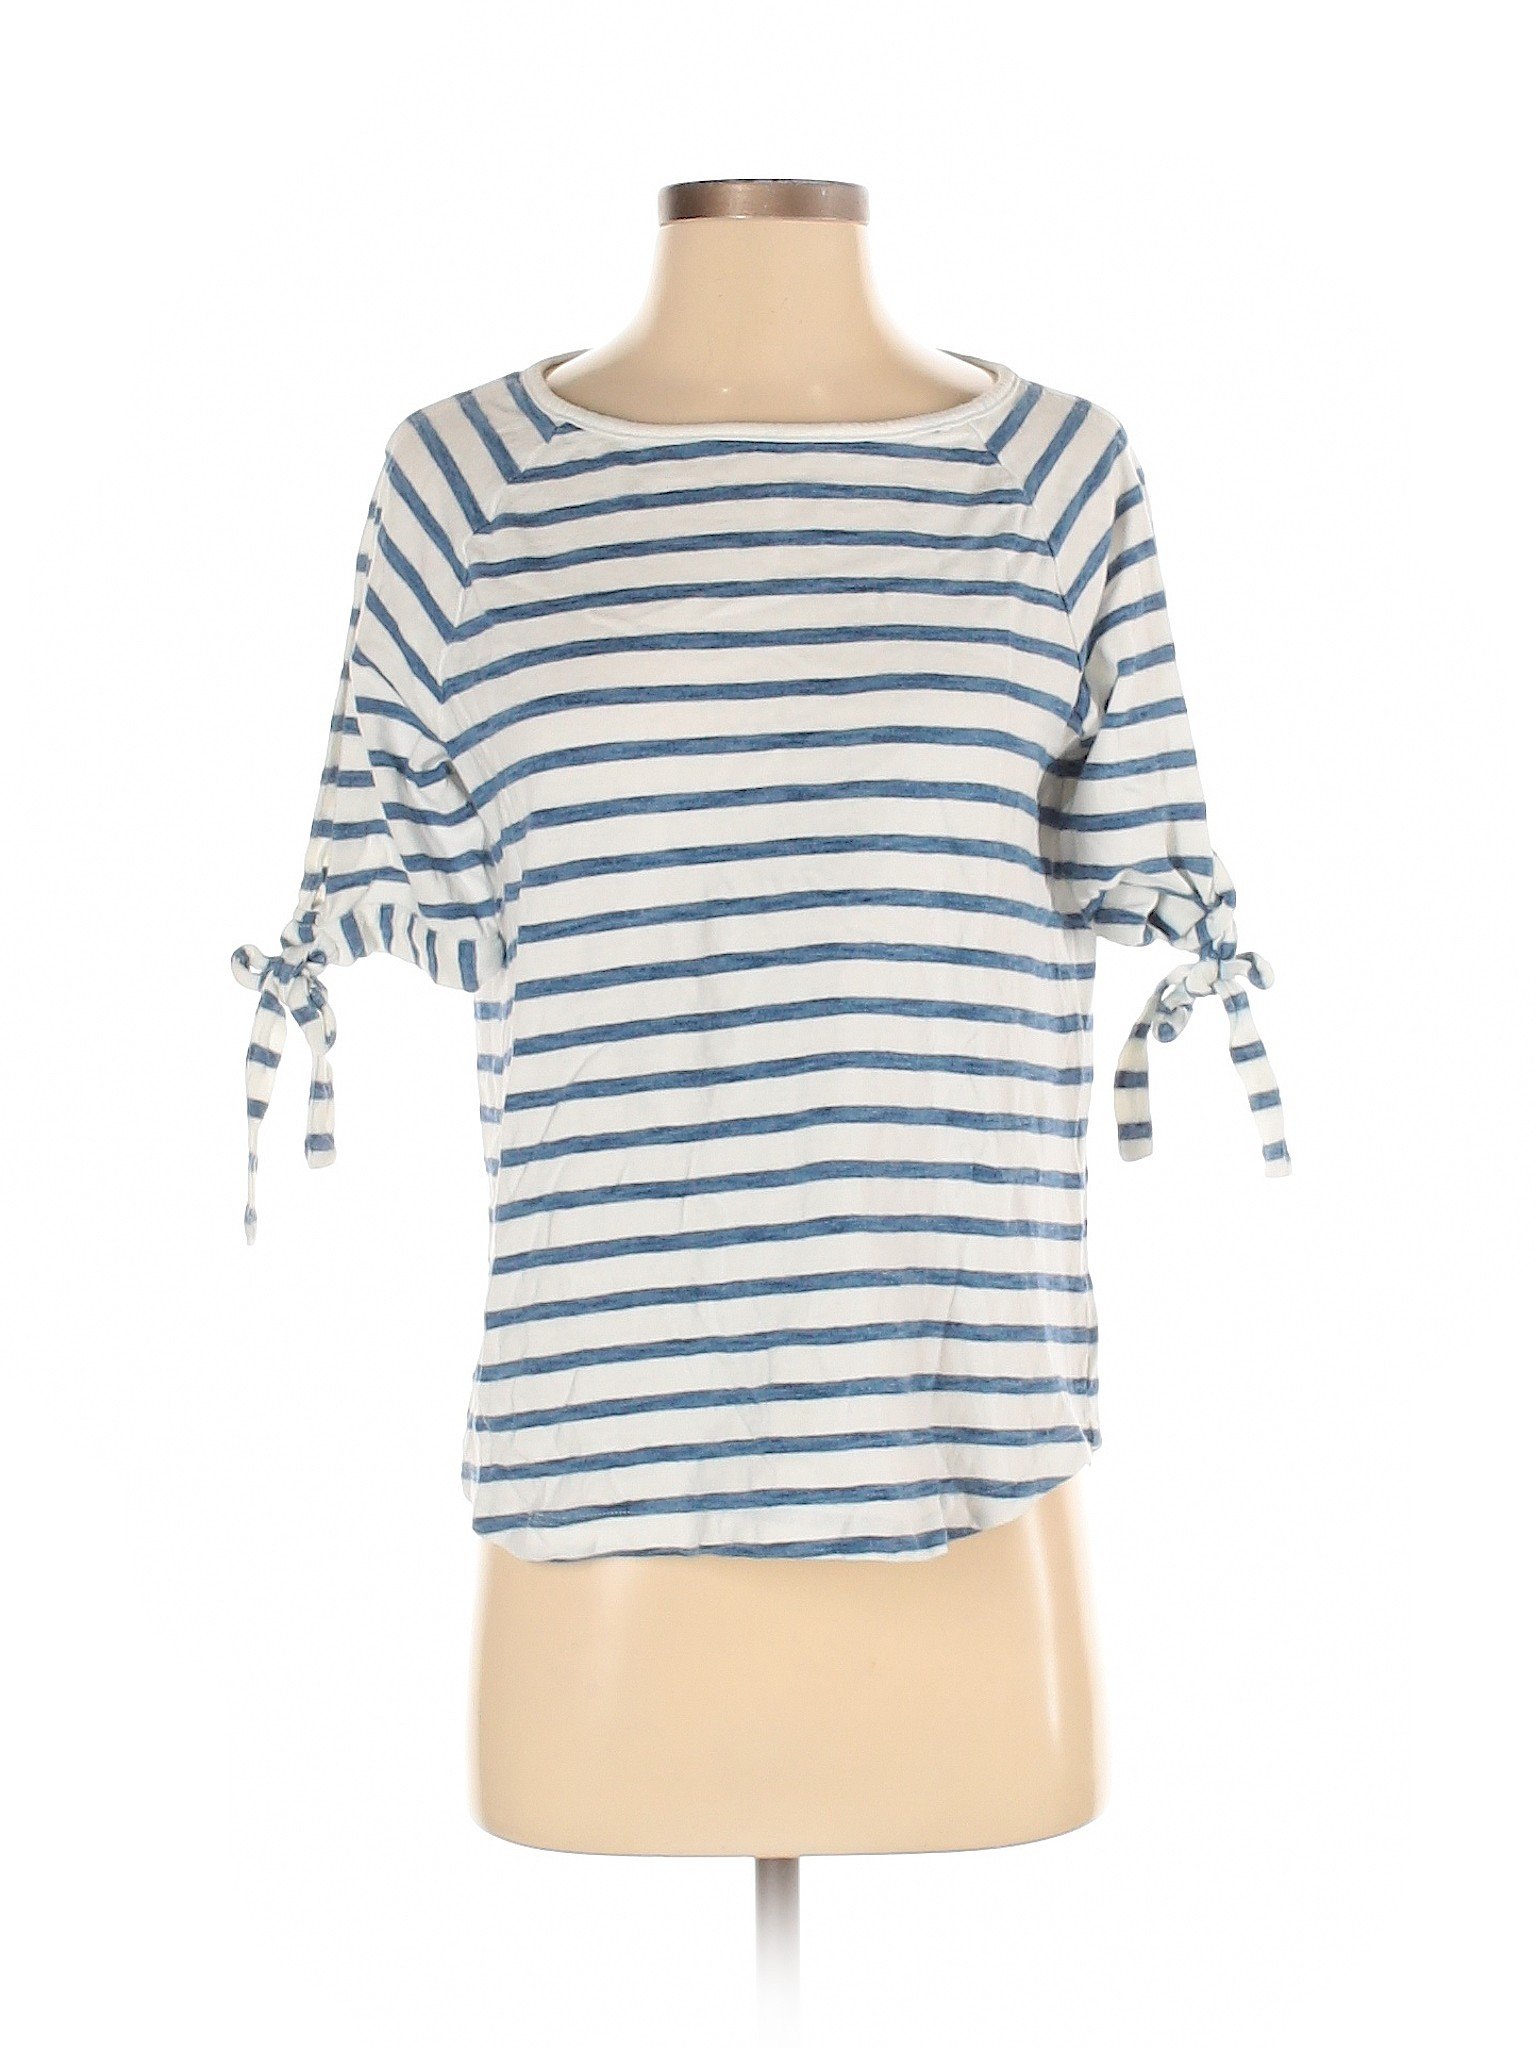 Jane and Delancey 100% Cotton Stripes White Blue Short Sleeve Top Size ...